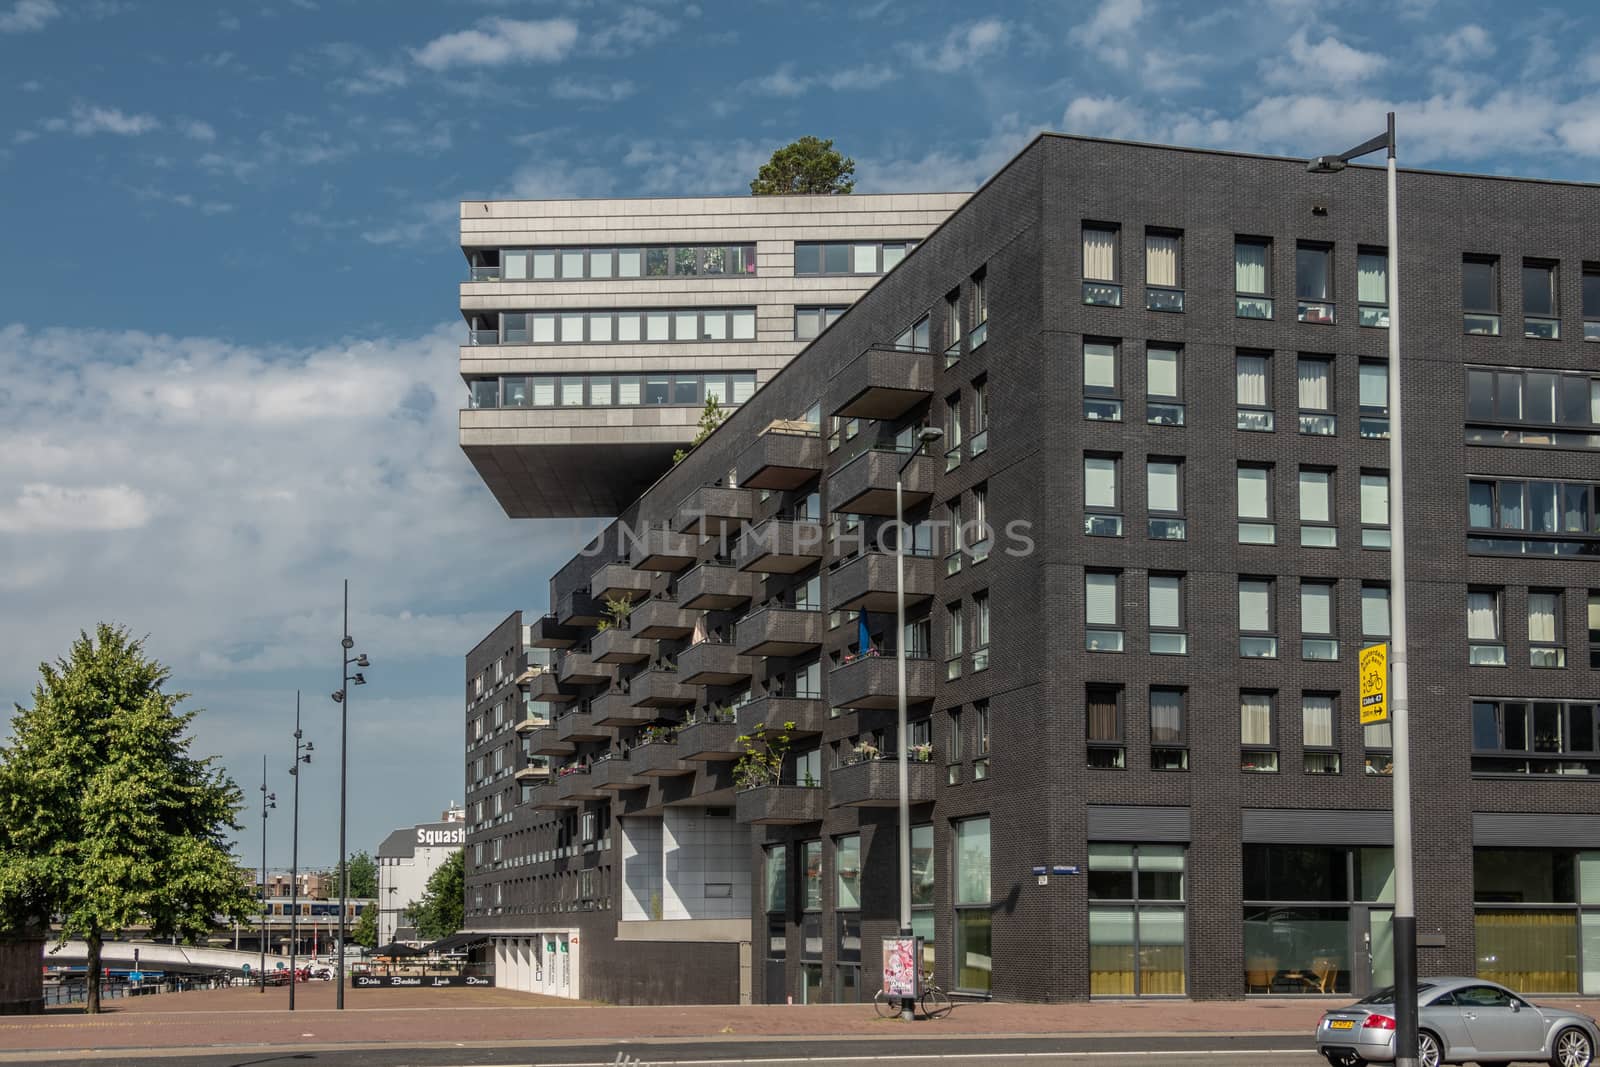 Amsterdam, the Netherlands - June 30, 2019: Modern architecture office building on Westerdokplein has section with dark walls and other part on top with white gray walls. Blue sky, green foliage.